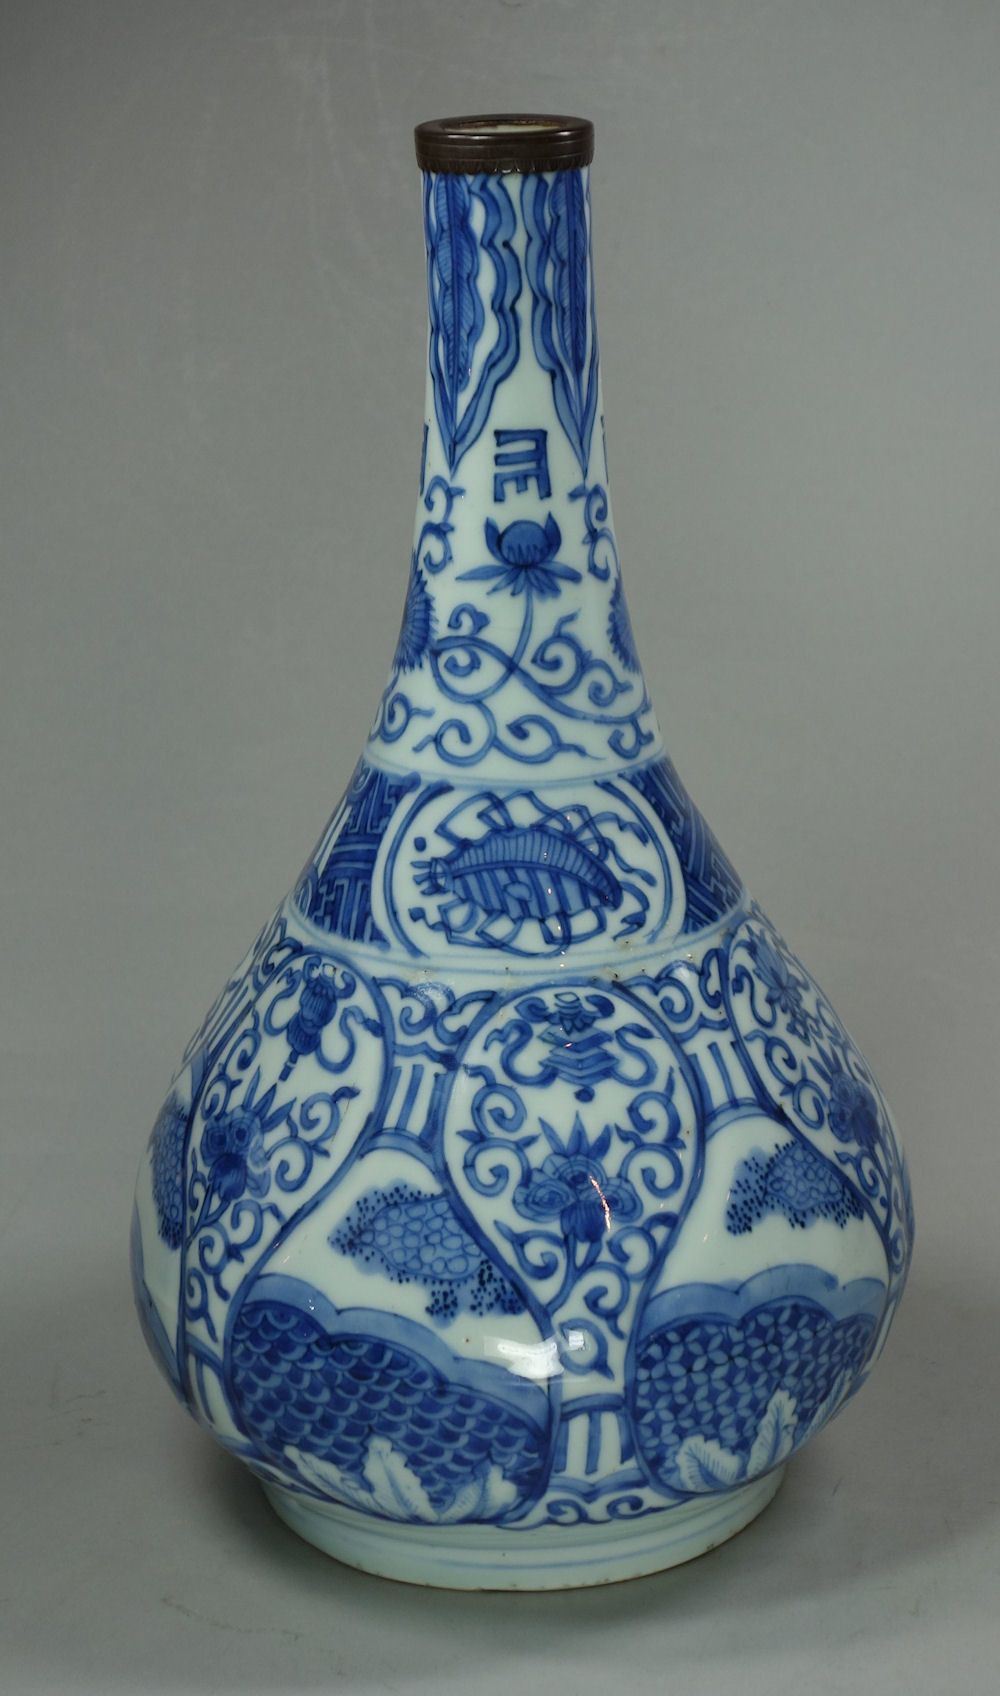 24 Lovely Blue and White asian Vase 2024 free download blue and white asian vase of chinese blue and white kraak bottle vase wanli 1573 1610 with a with chinese blue and white kraak bottle vase wanli 1573 1610 with a moulded body of stylised fol